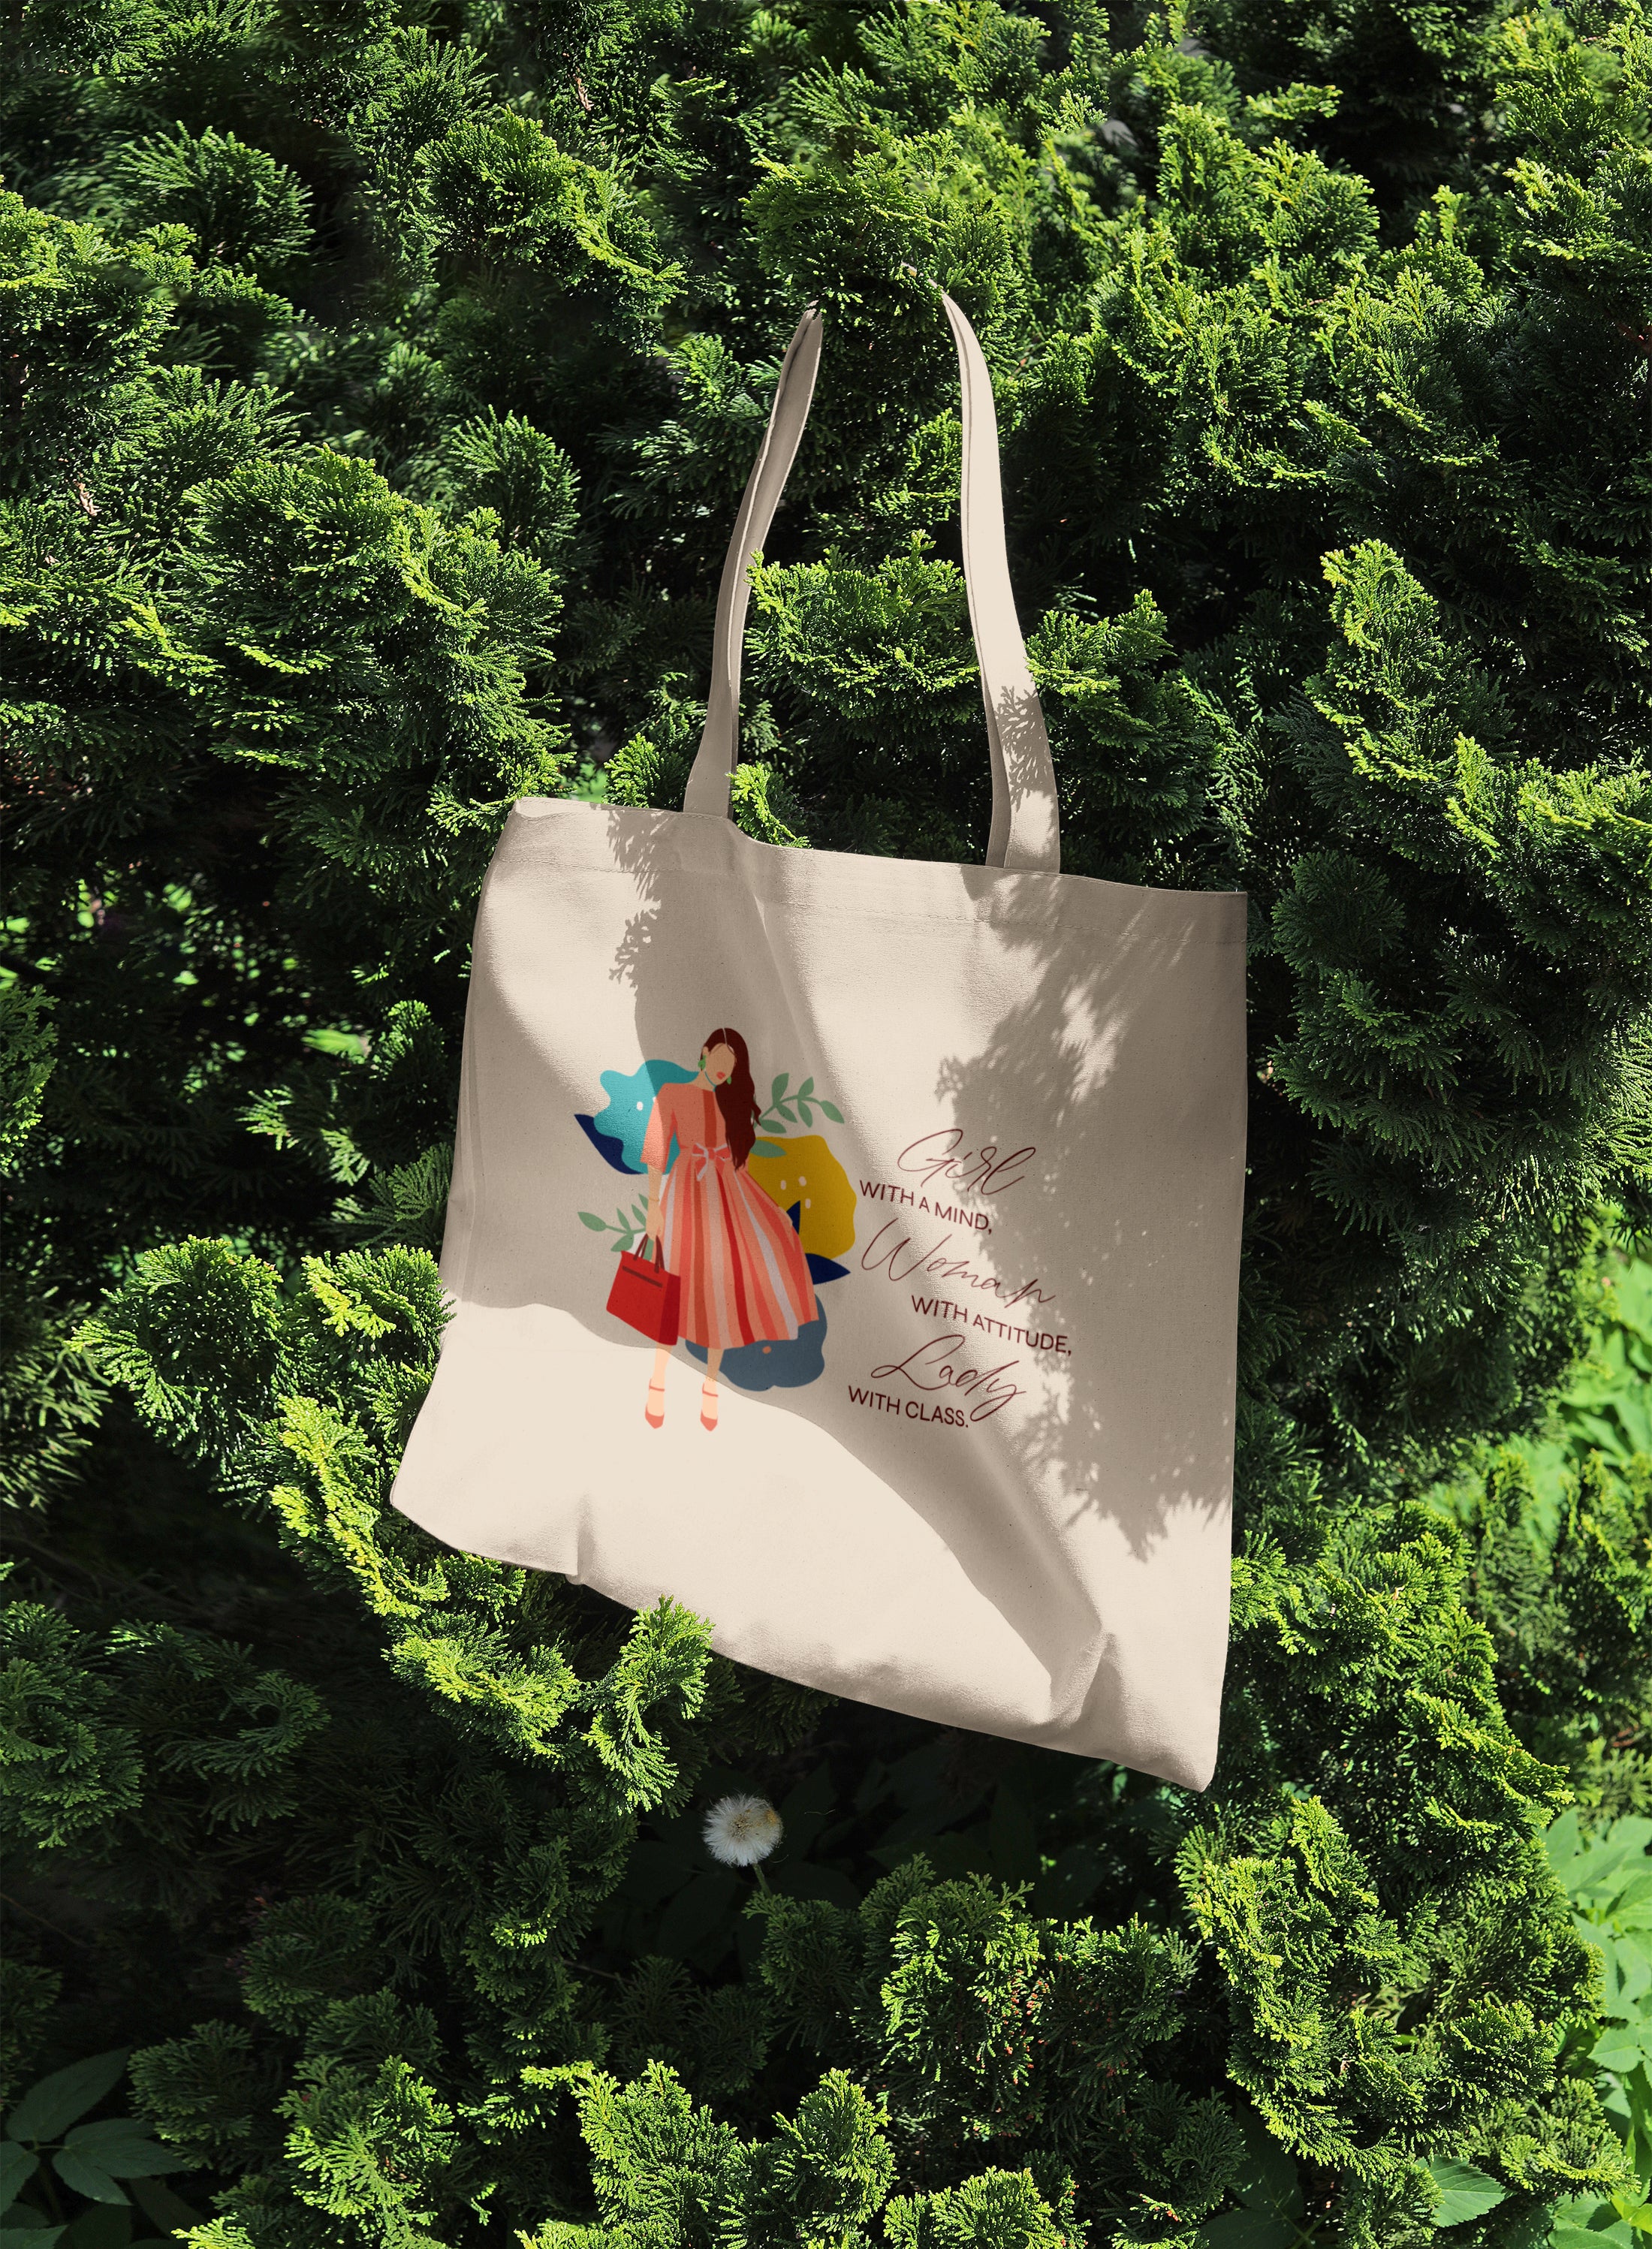 "Girl With A Mind" Tote Bag